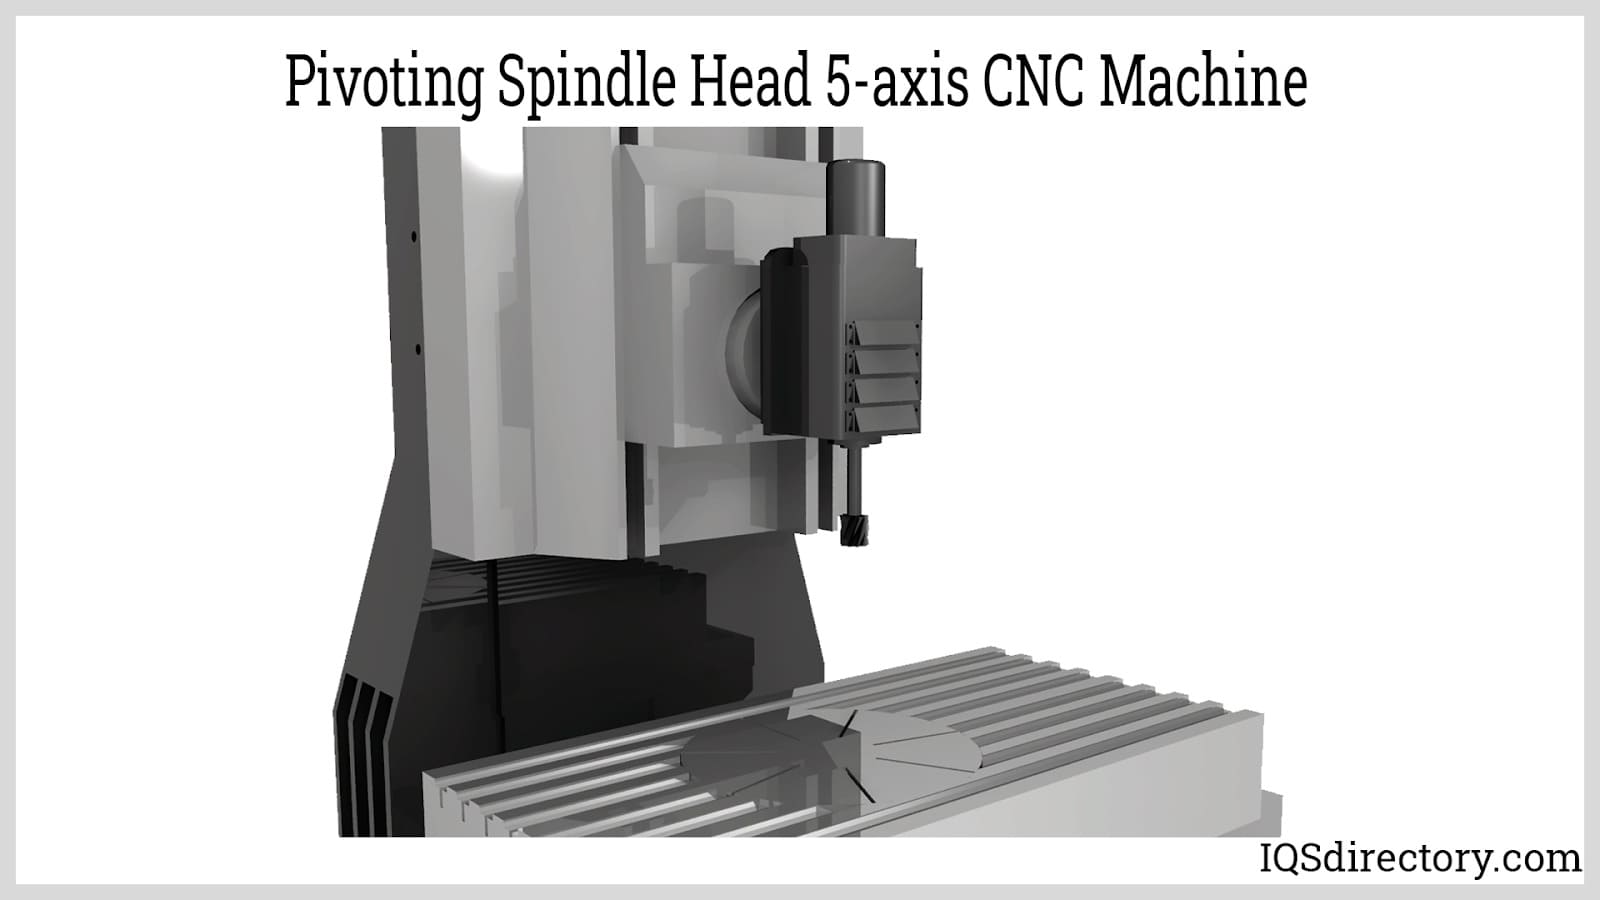 Pivoting Spindle Head 5-axis CNC Machine